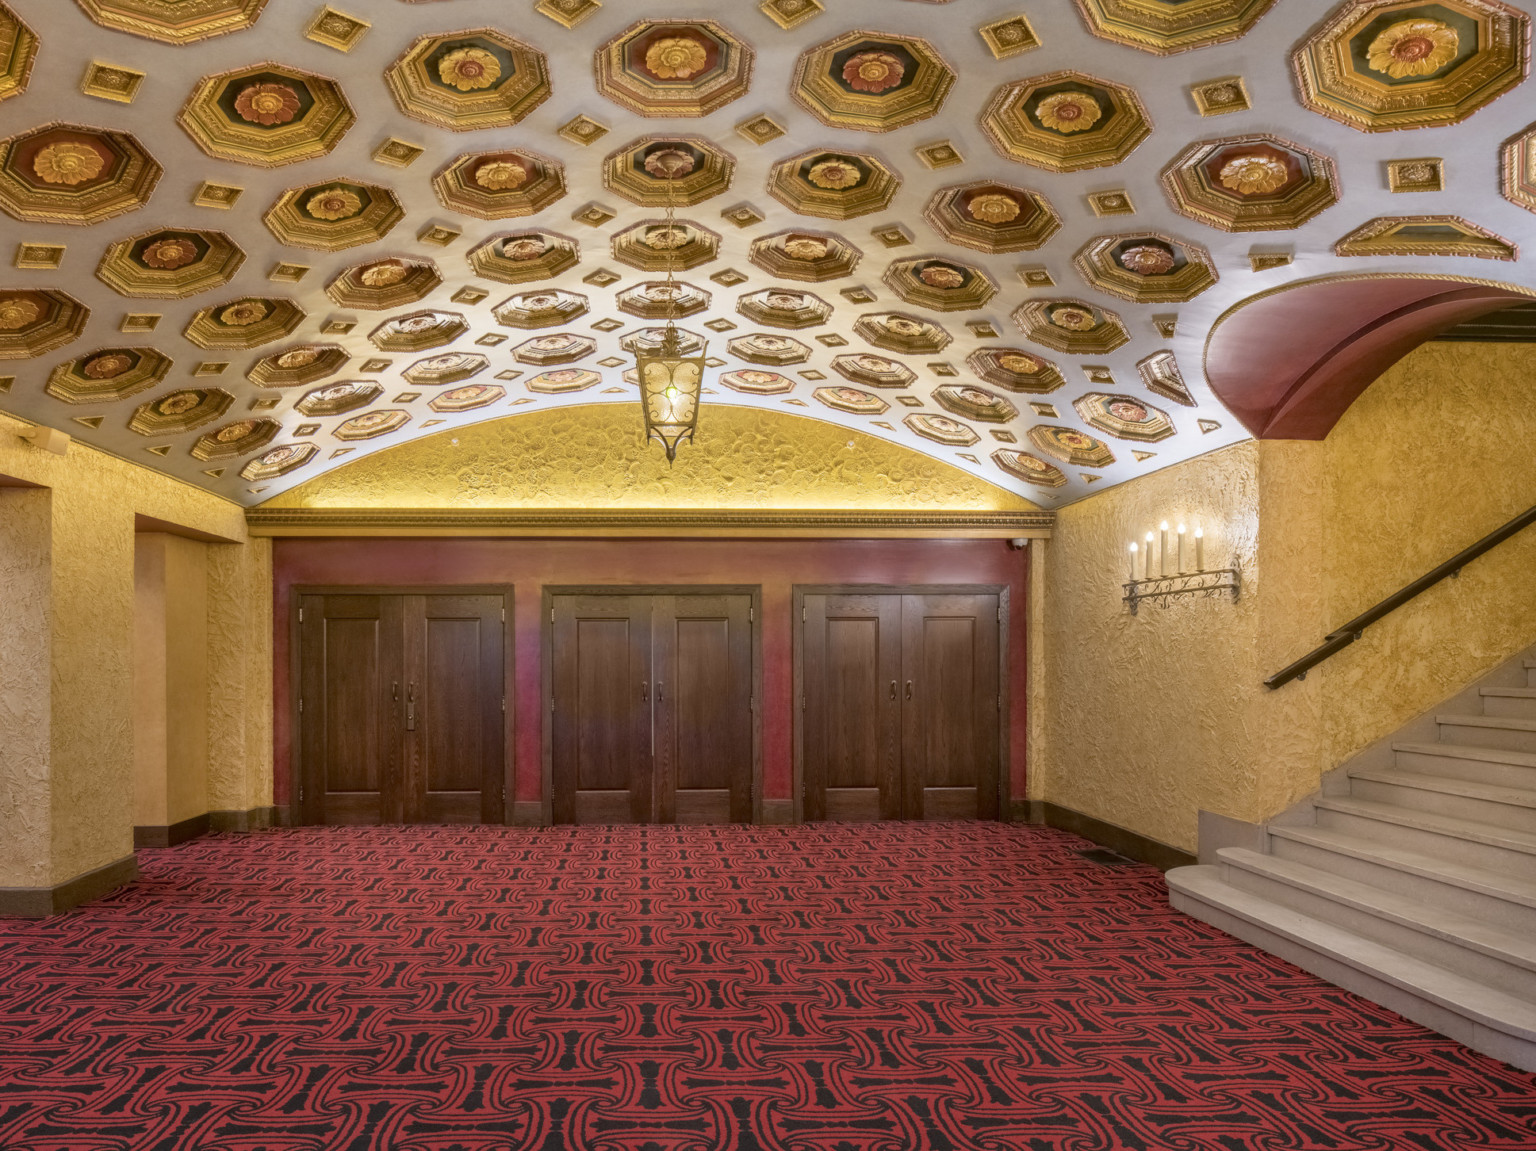 Hallway with arching ceiling and carved floral details in recessed octagonal niches. yellow stucco walls, red patterned carpet